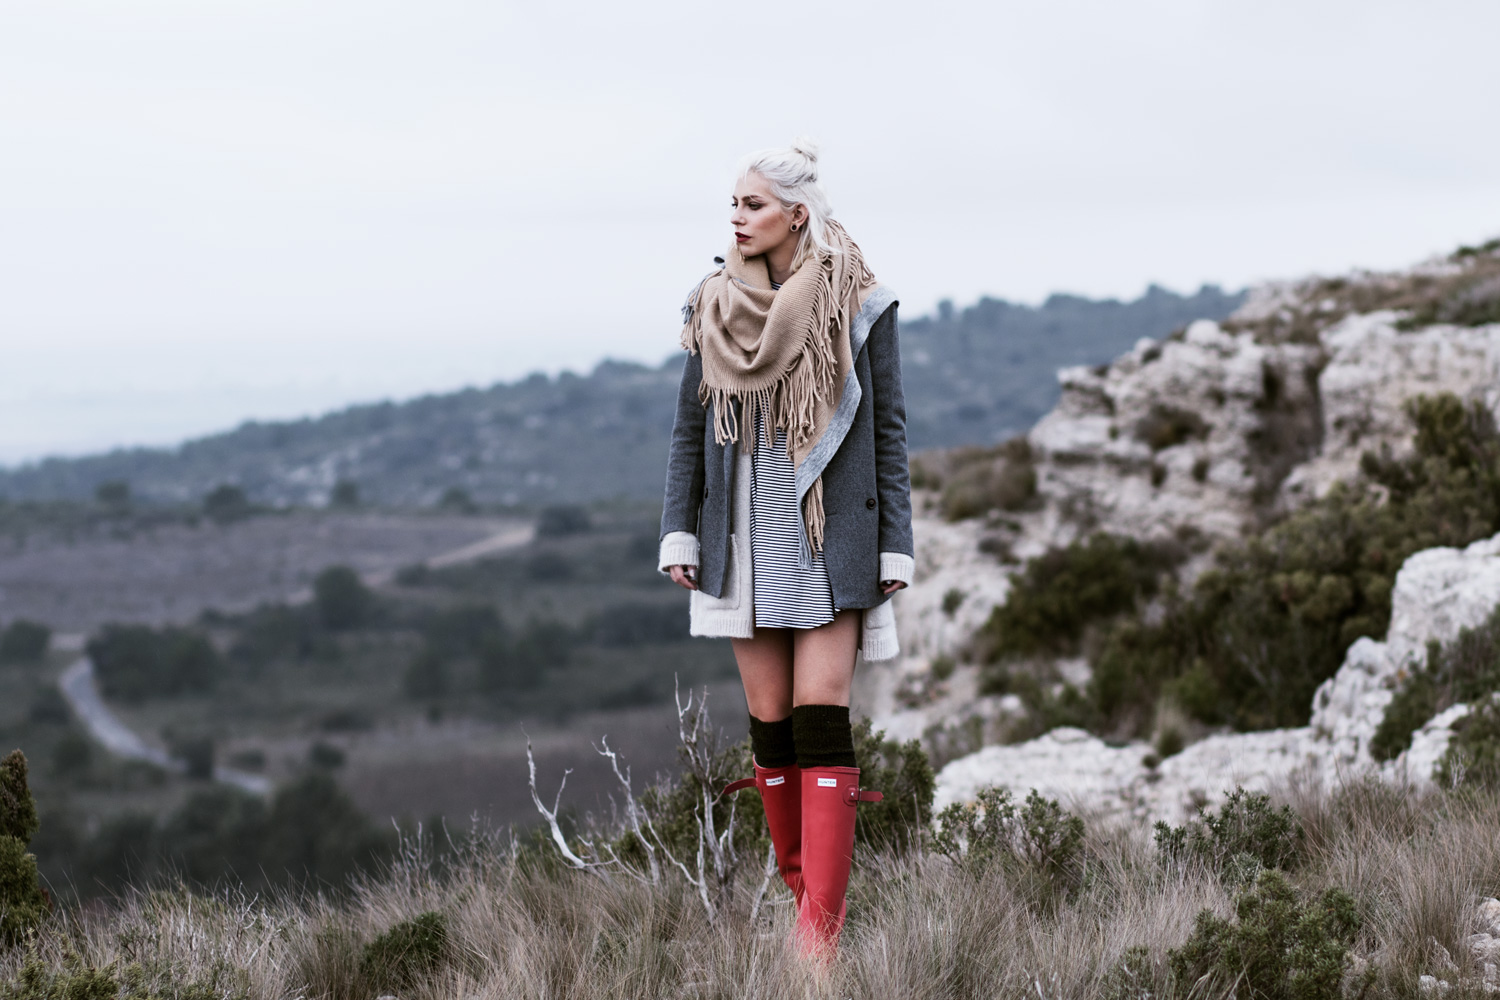 view more details on my blog | wearing Hunter boots, Ganni jacket, Strenesse cardigan | hiking in the mountains | outfit, editorial, fashion